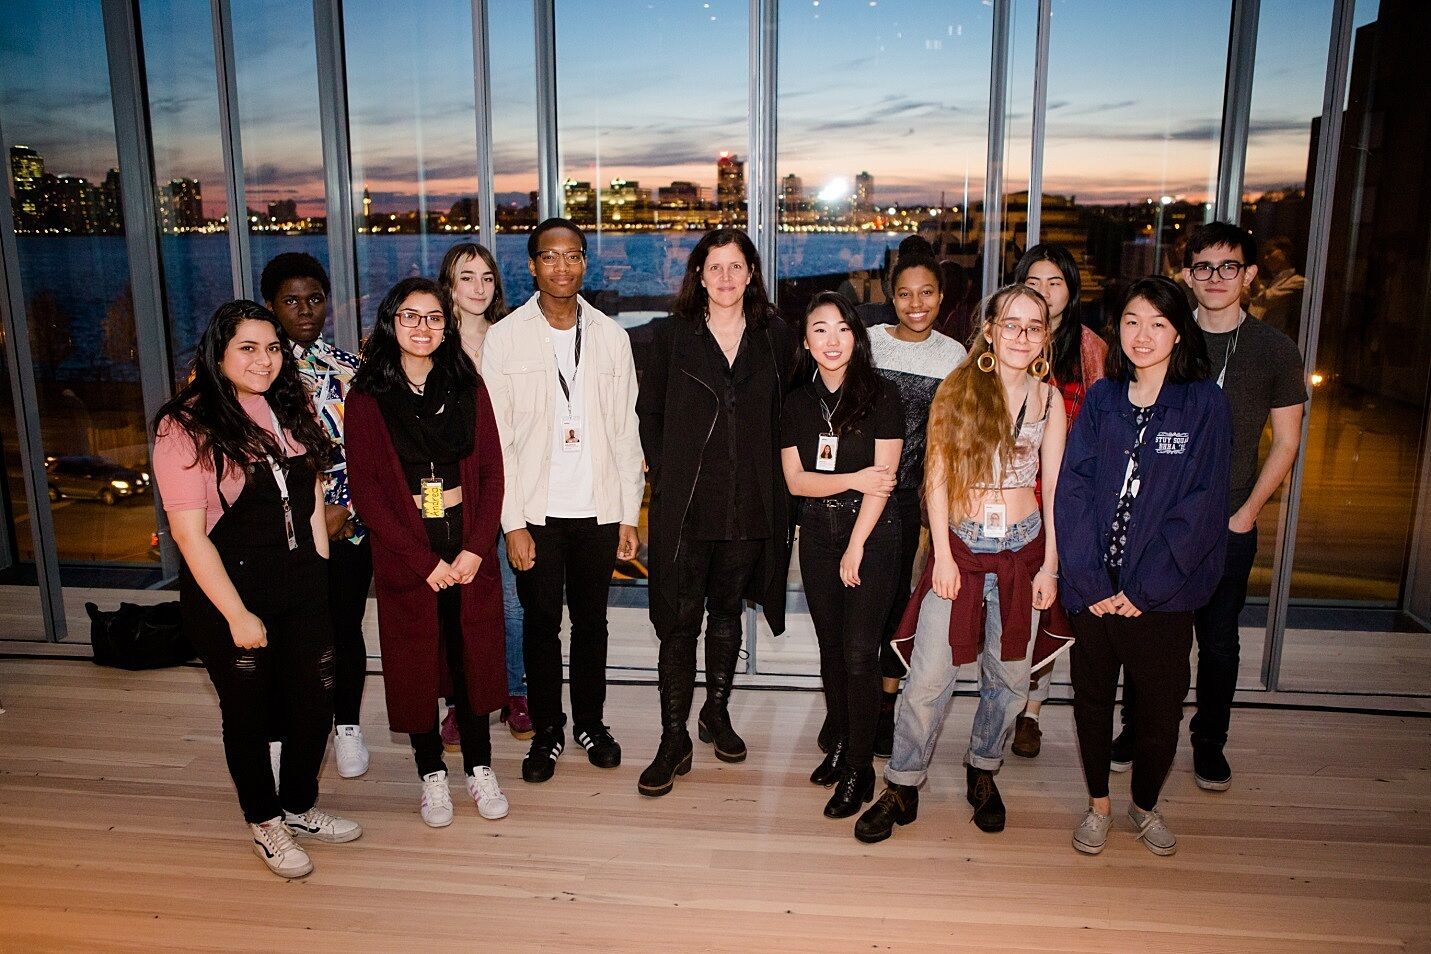 A group of teens poses with filmmaker Laura Poitras in a gallery overlooking the Hudson River.